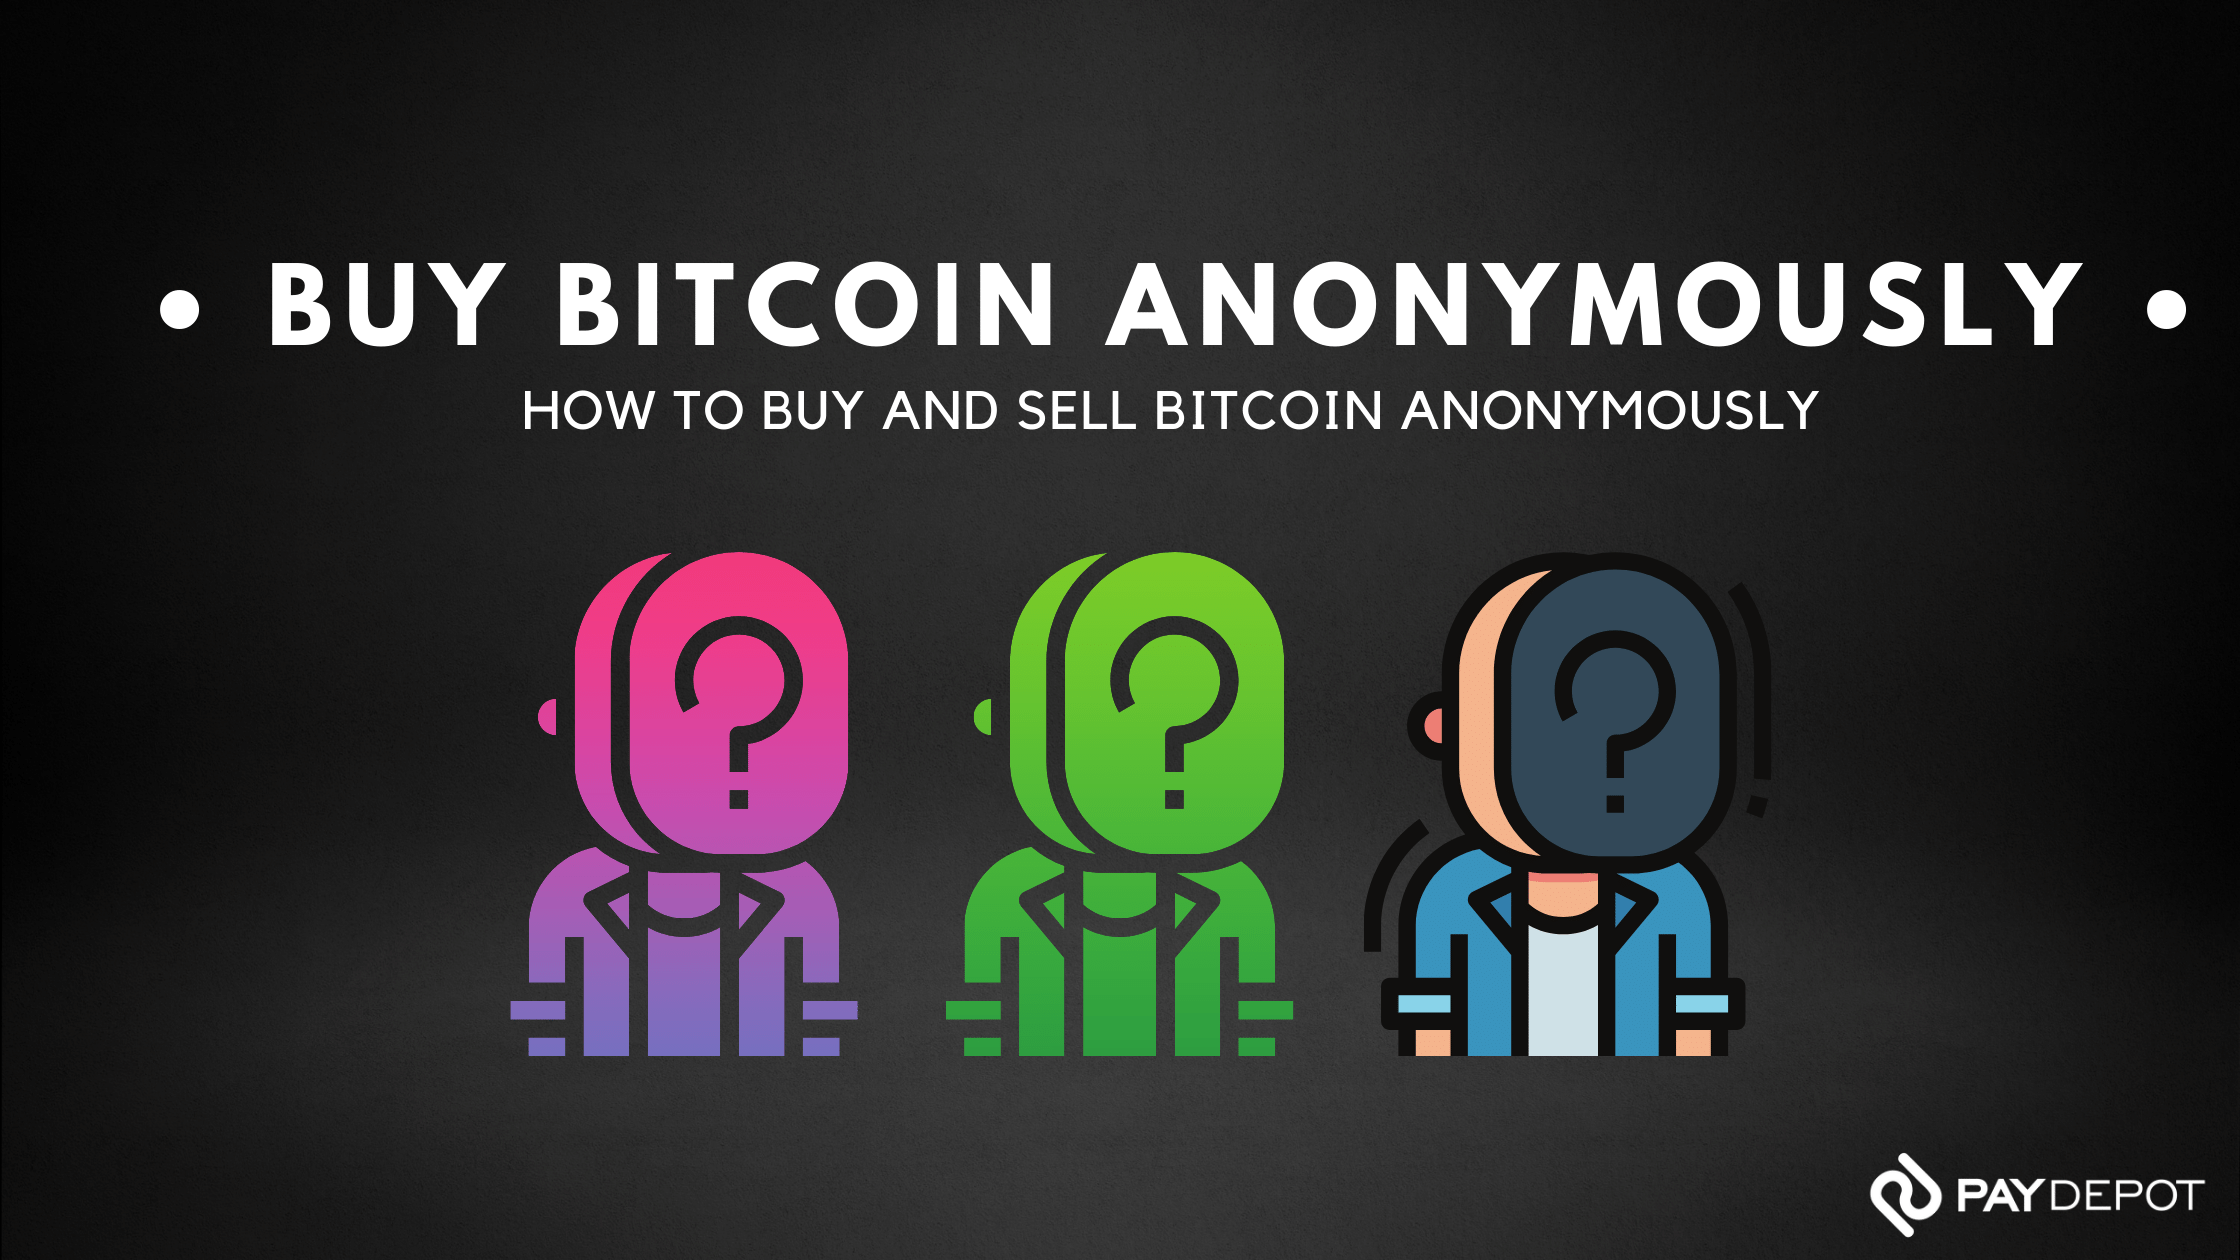 How to Buy and Sell Bitcoin Anonymously